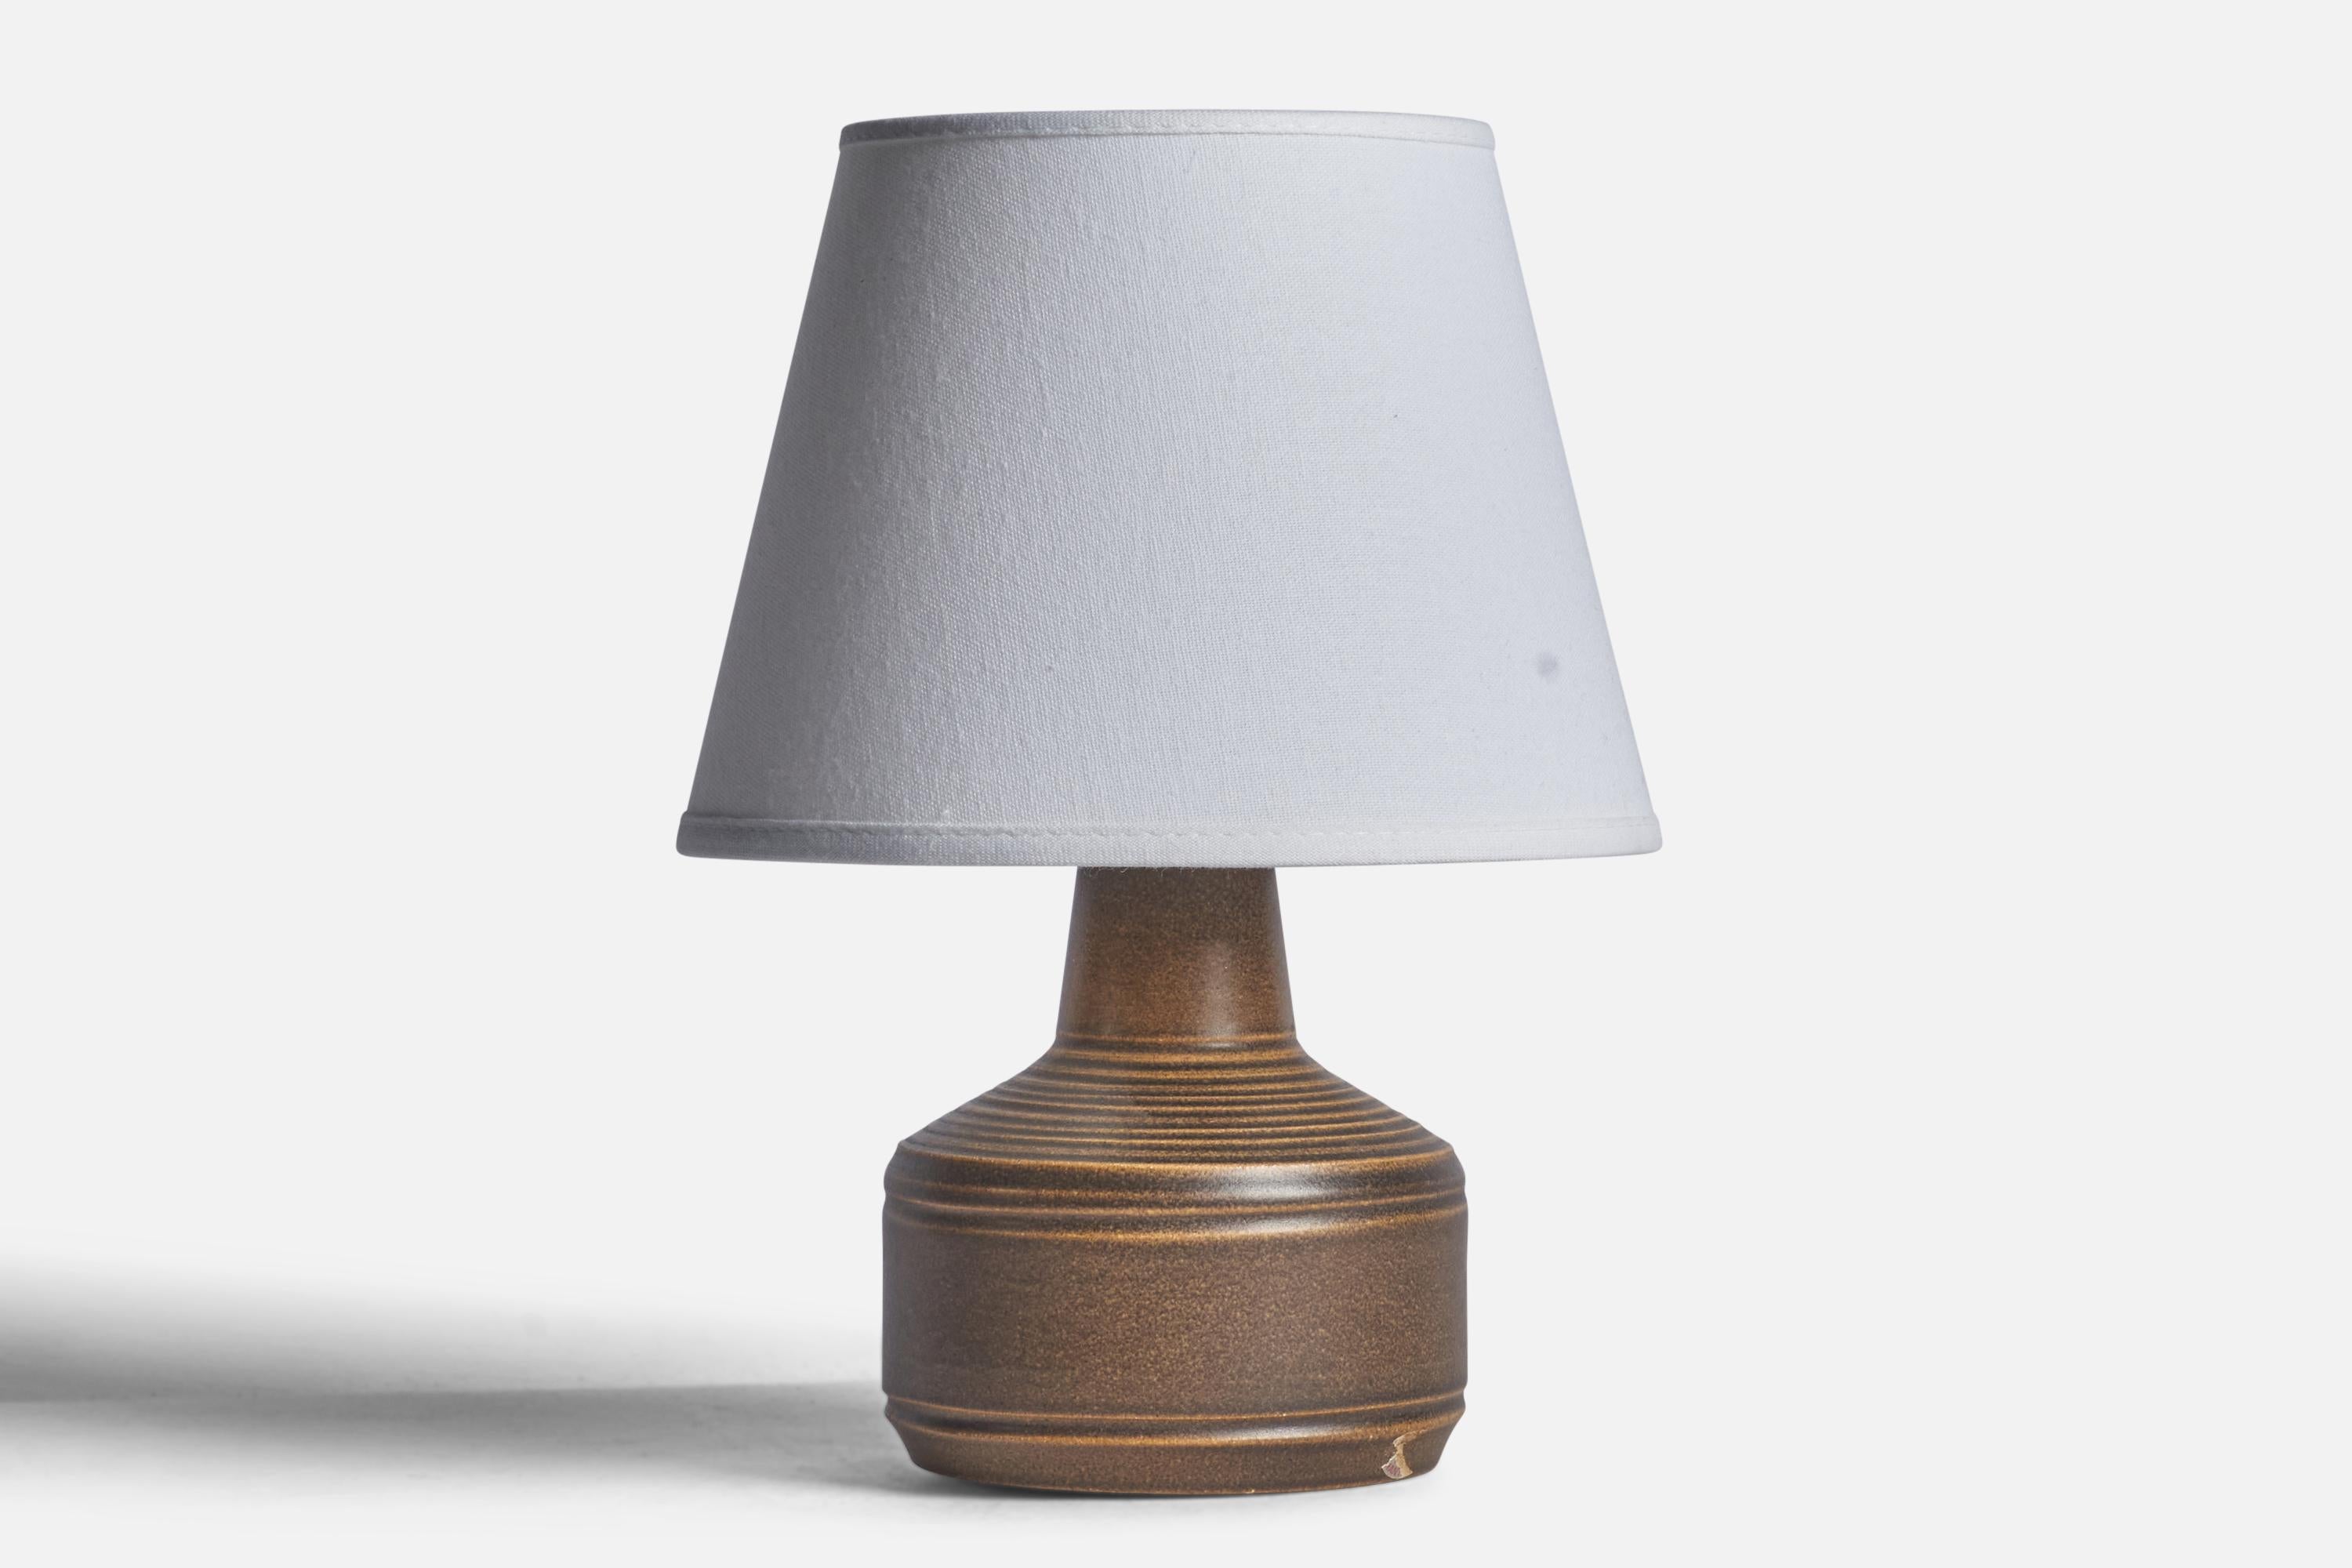 A brown-glazed stoneware table lamp designed and produced by Henry Brandi, Vejbystrand, Sweden, c. 1960s.

Dimensions of Lamp (inches):8.5” H x 4.75” Diameter
Dimensions of Shade (inches): 5” Top Diameter x 8” Bottom Diameter x 6” H 
Dimensions of